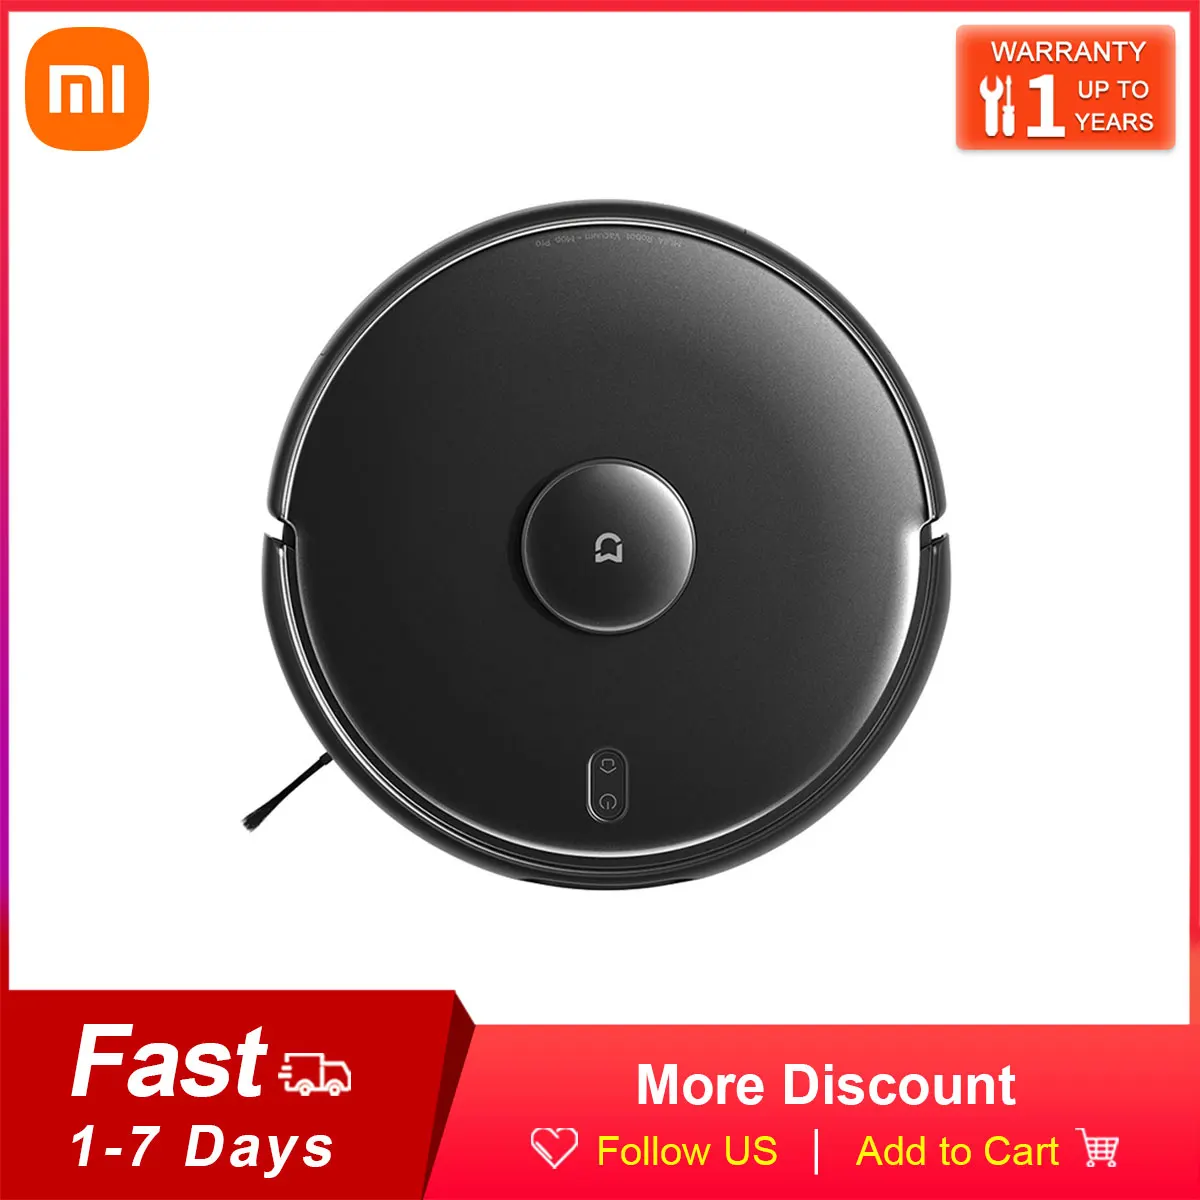 

XIAOMI MIJIA Robot Vacuum Mop Pro MJSTS1 4000PA LDS 3D TOF VSLAM Sweeping Washing Mopping Cleaner for Home Smart Map Mihome App